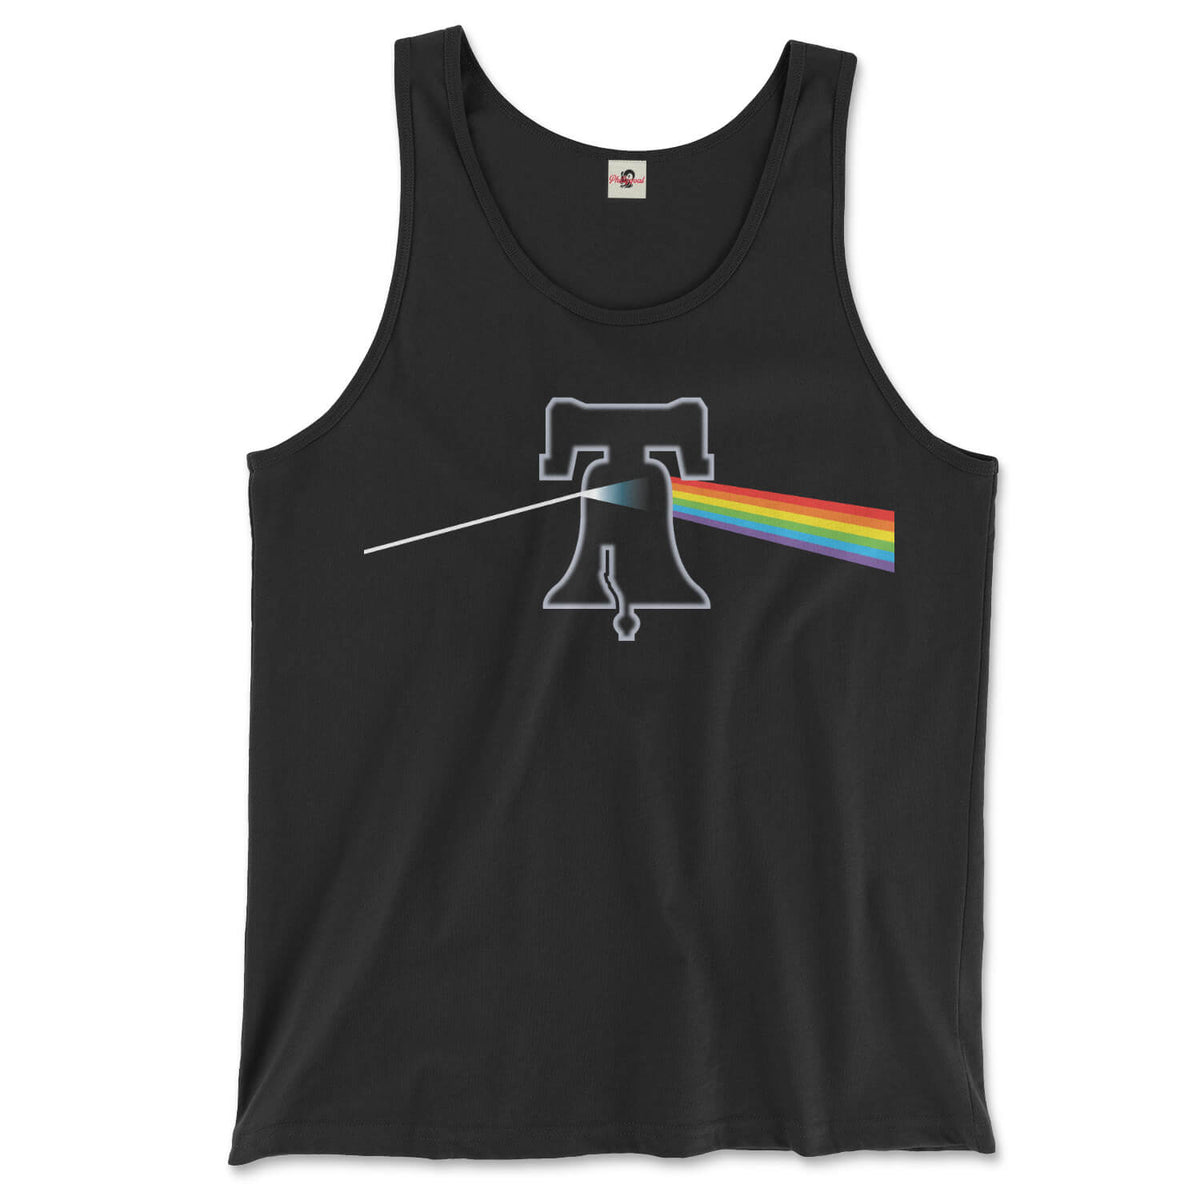 pink floyd philadelphia black phillygoat tank top with liberty bell in dark side of the moon rainbow prism design